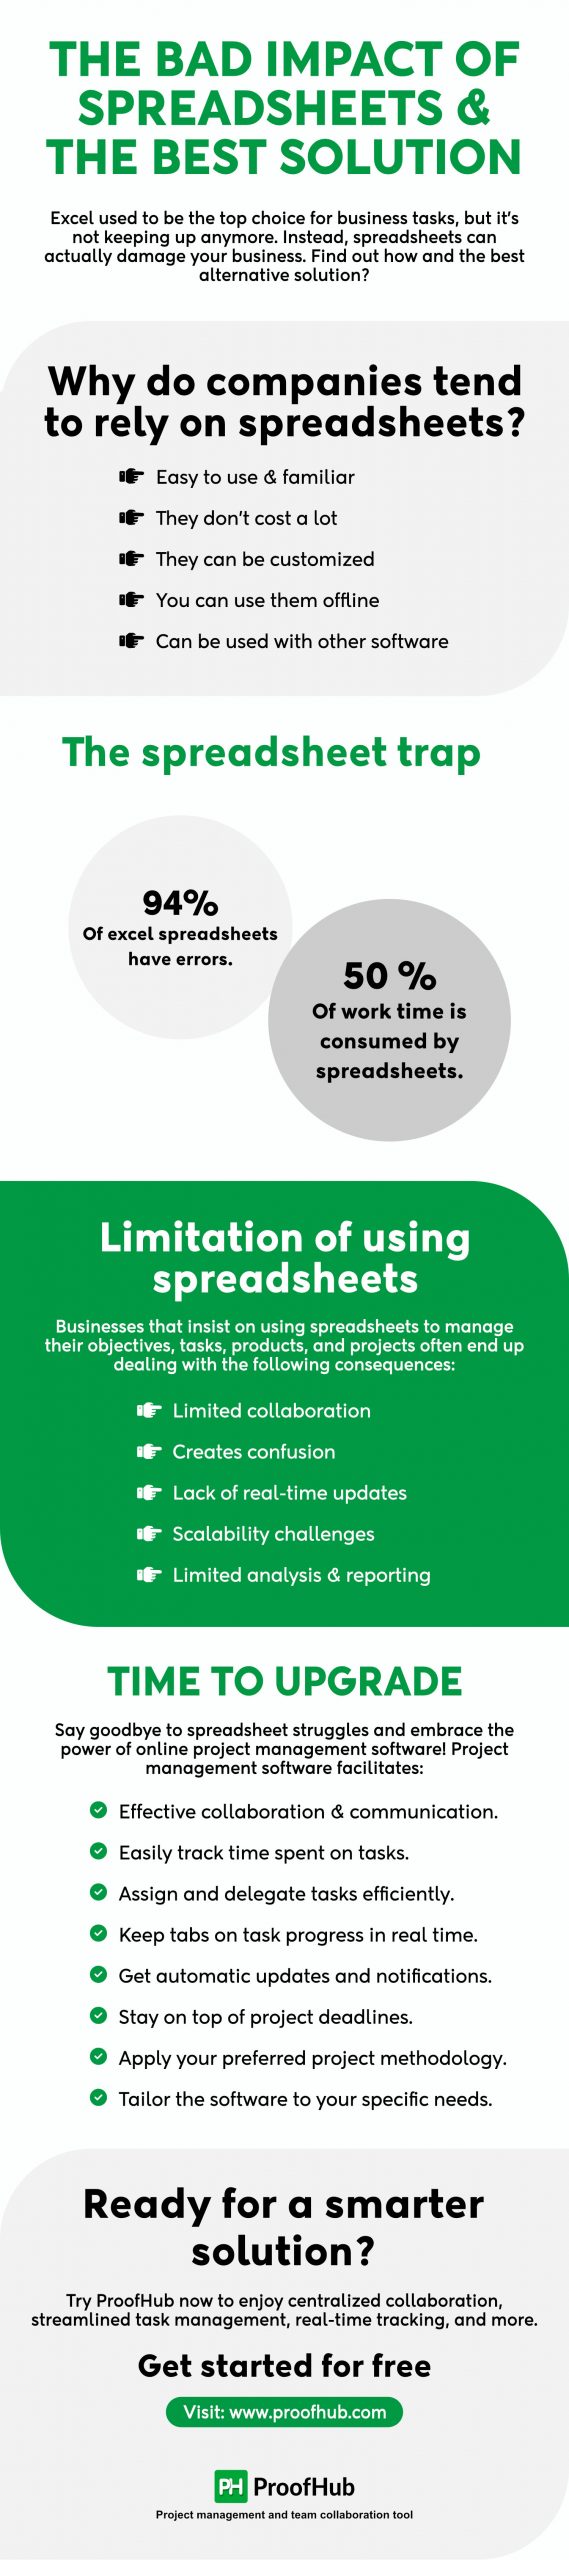 The Bad Impact of Spreadsheets and The Best Solution